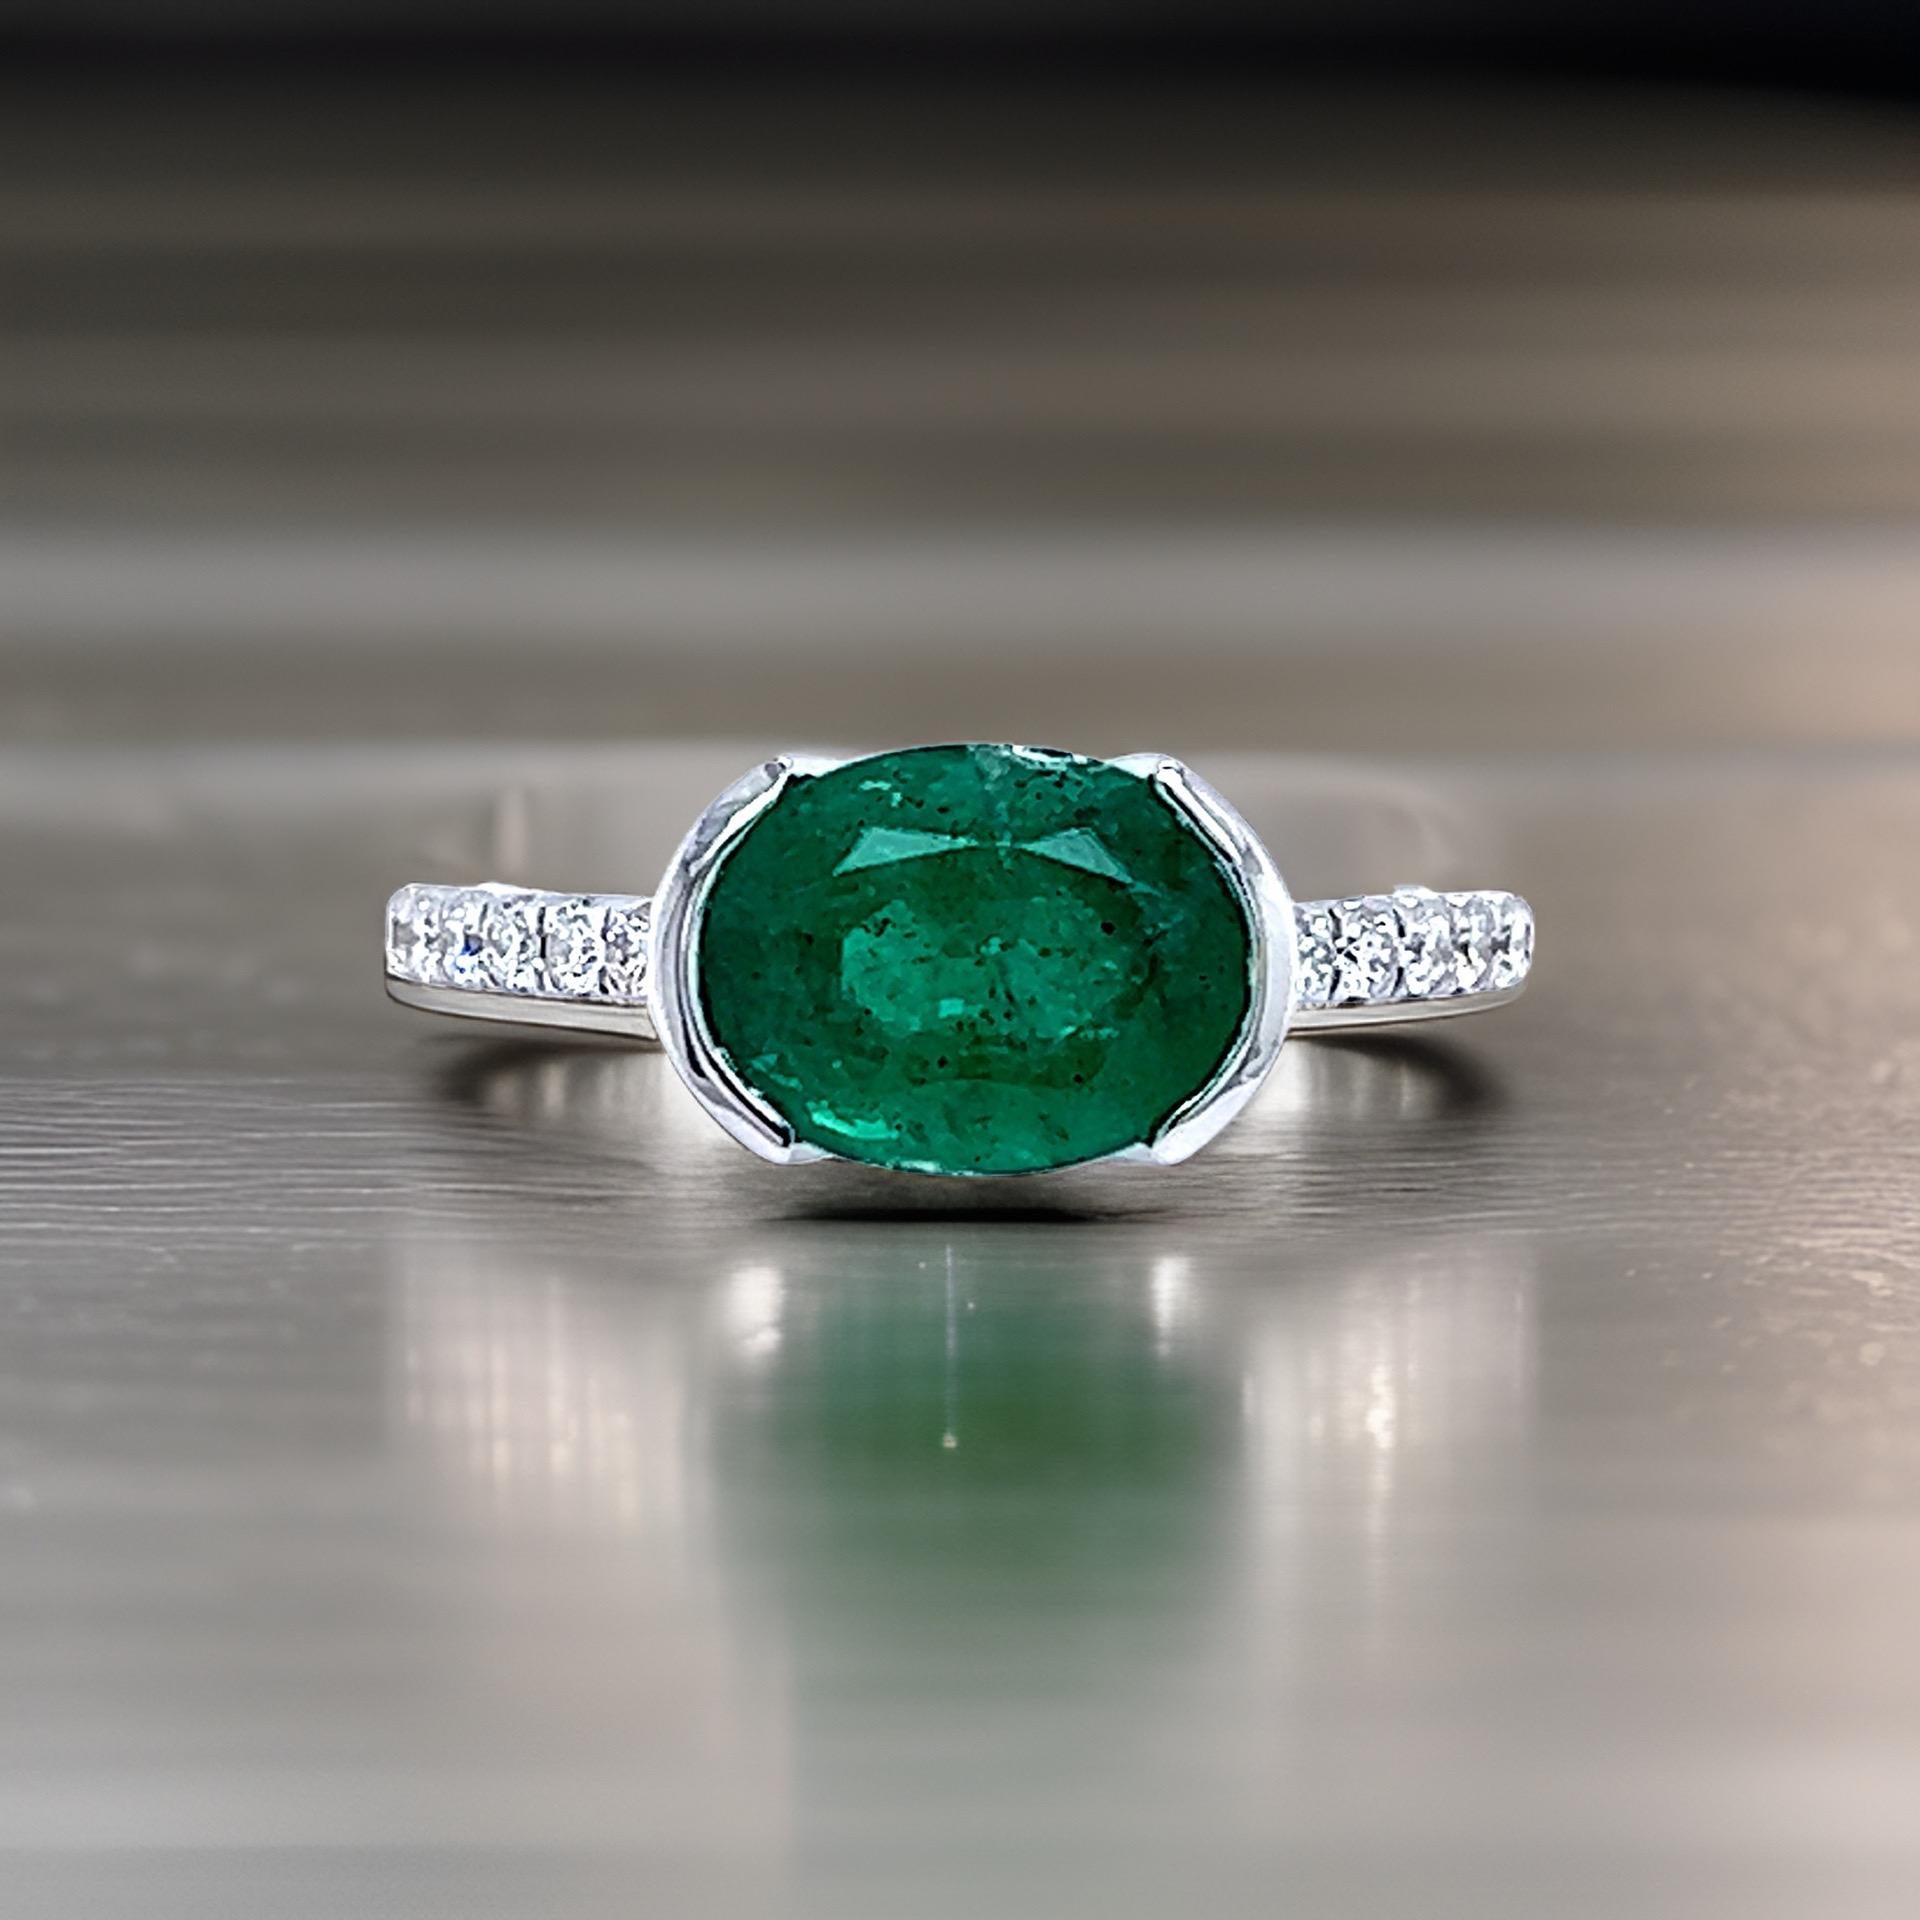 Natural Emerald Diamond Ring 6.5 14k W Gold 2.33 TCW Certified For Sale 2